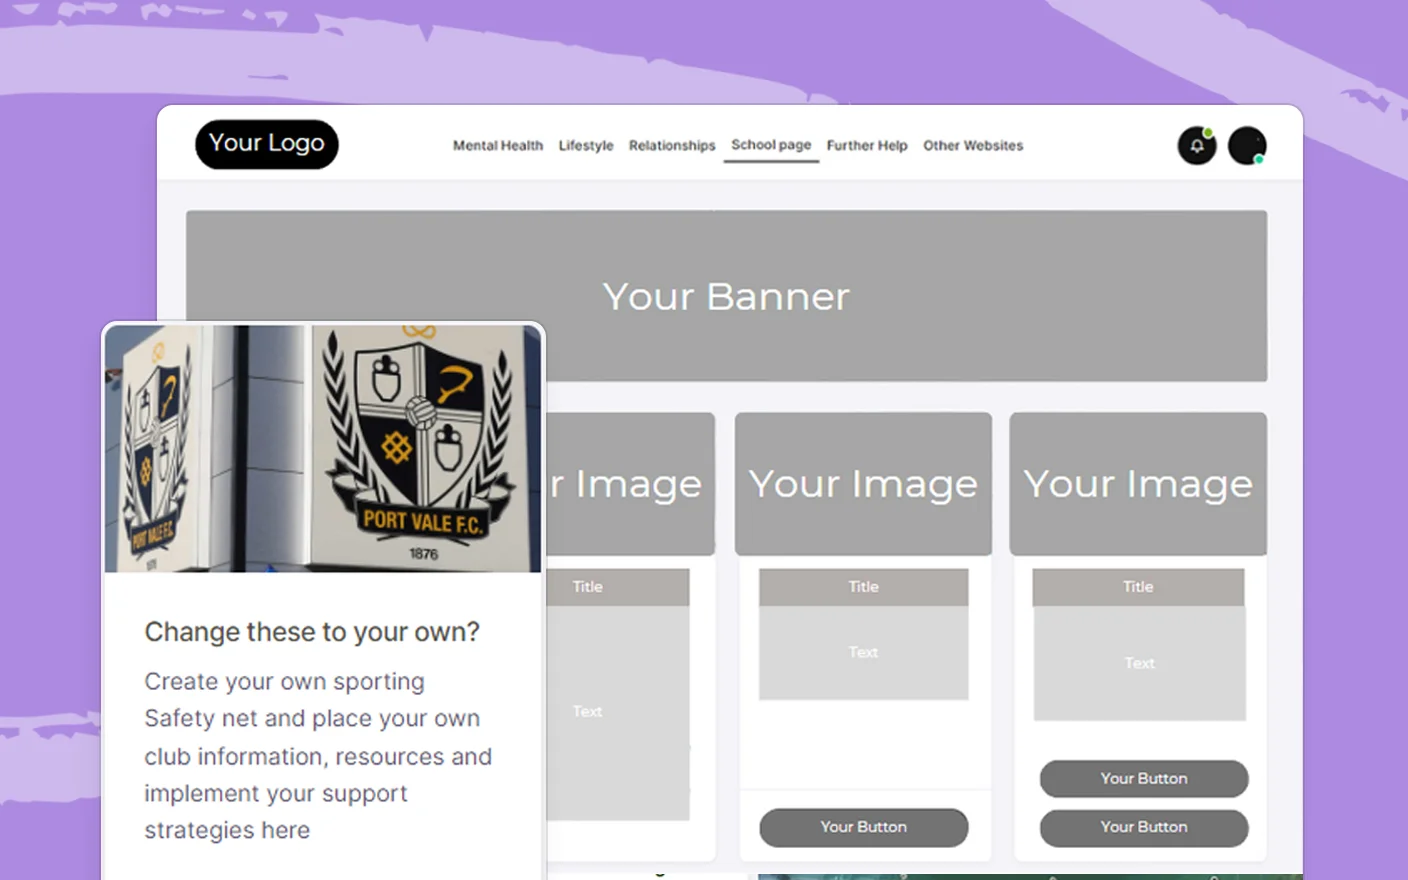 Web page template featuring a sports club logo and customizable areas for banners and images, ready for branding with club-specific content.